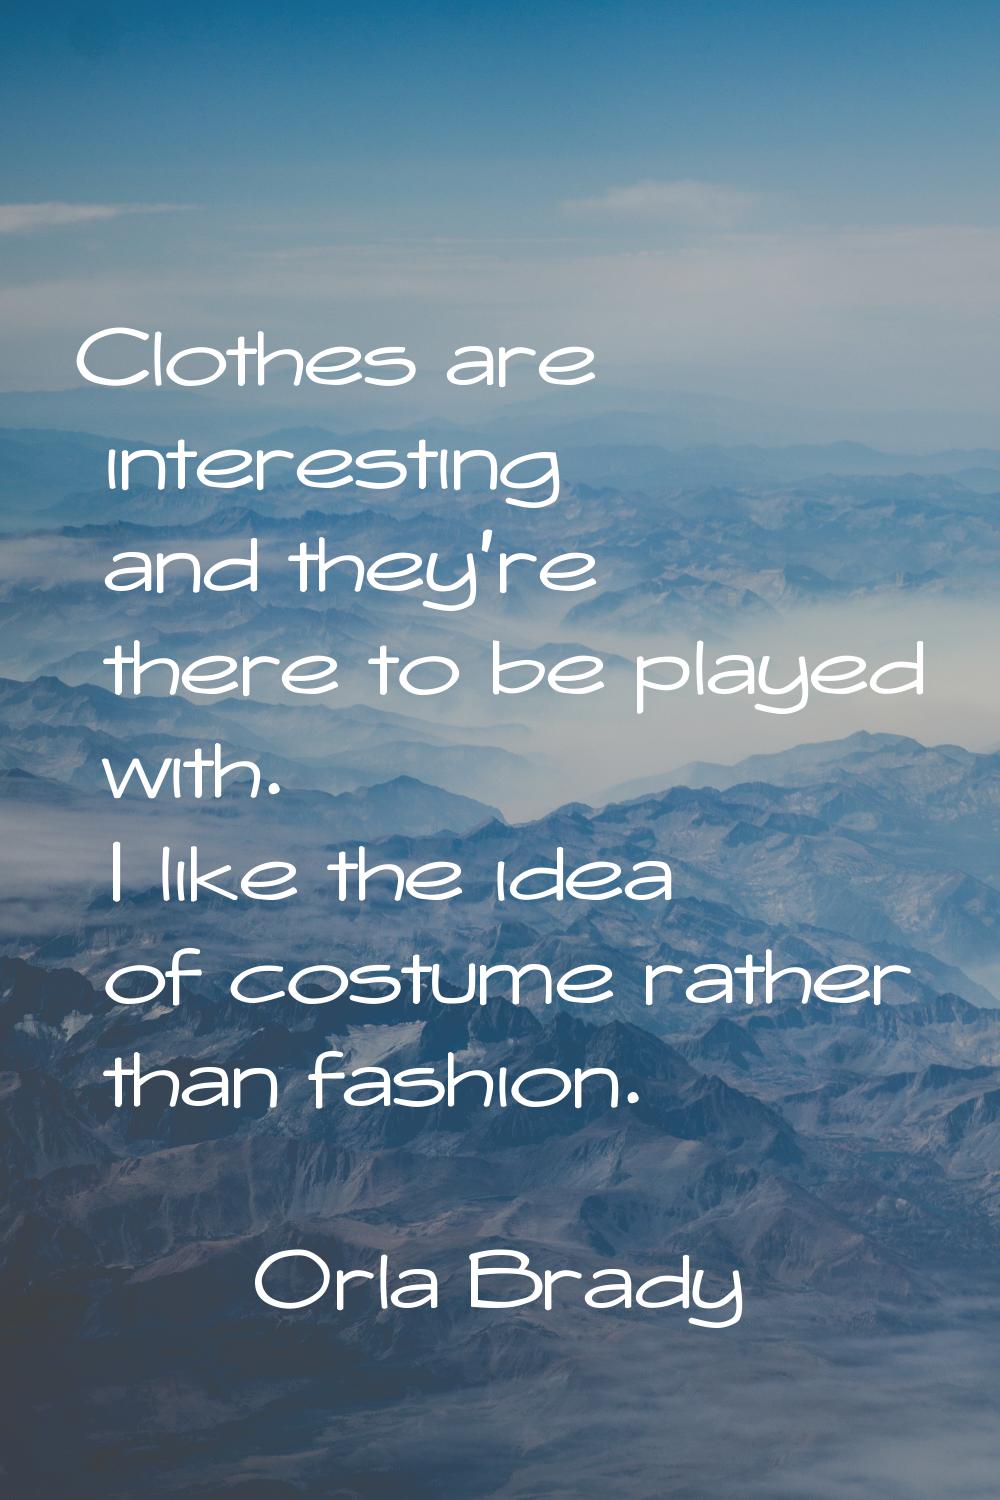 Clothes are interesting and they're there to be played with. I like the idea of costume rather than